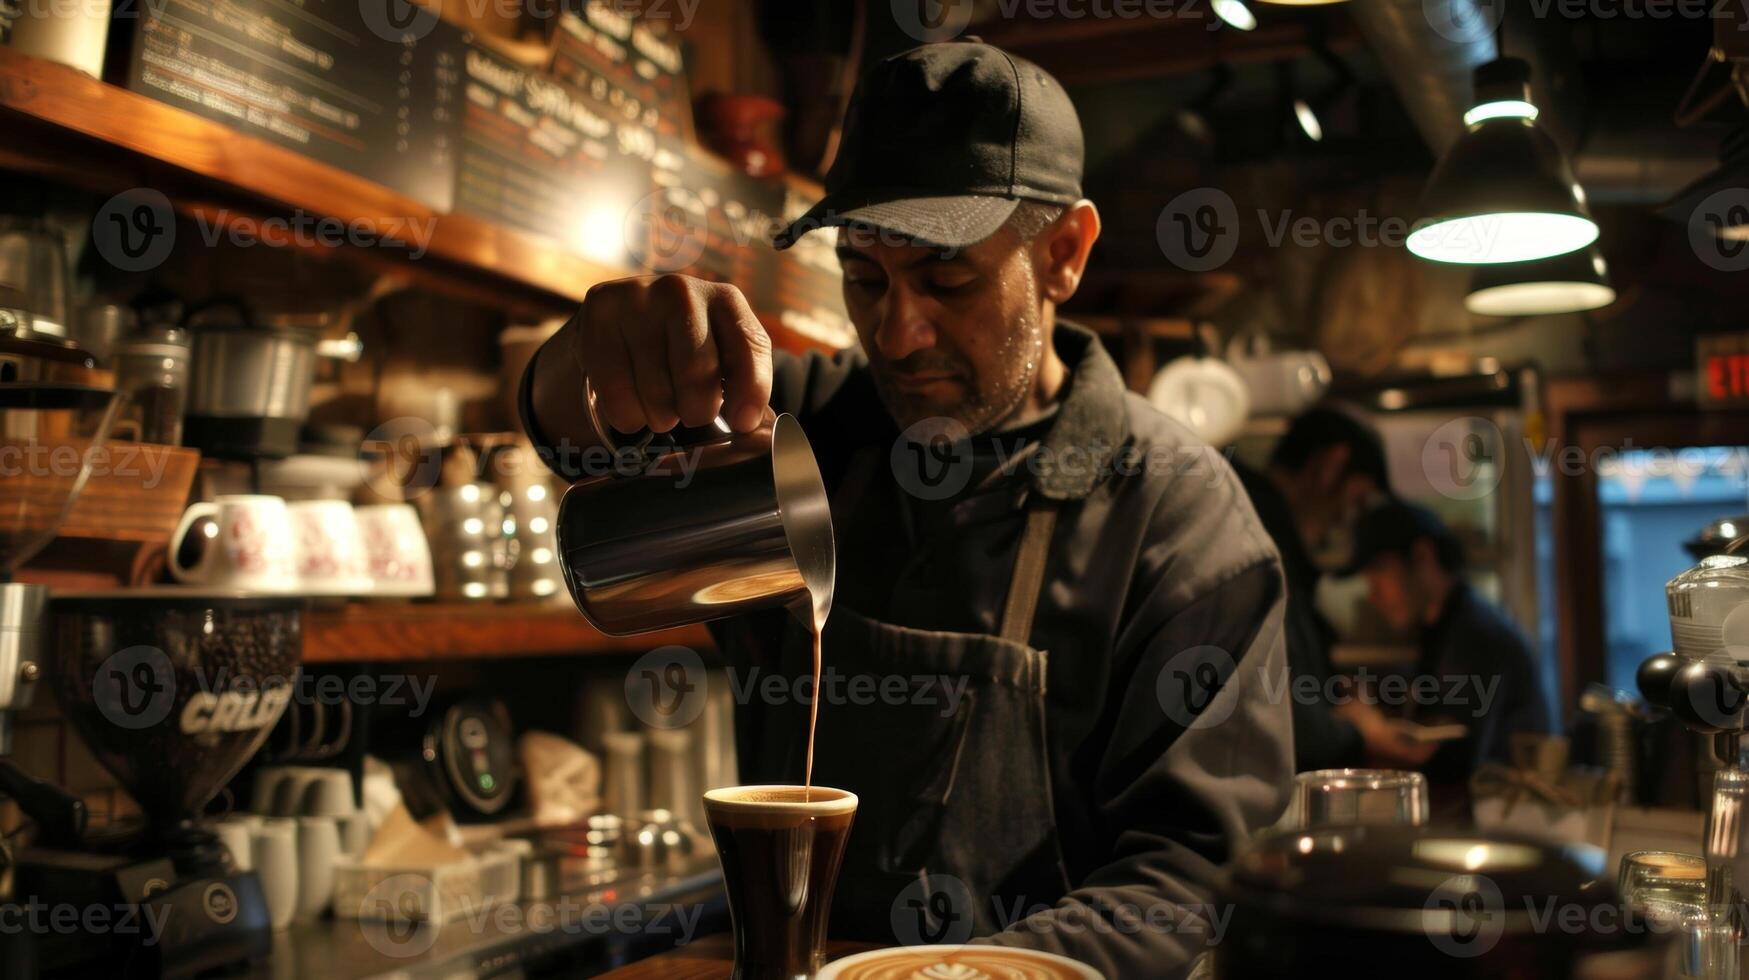 The scent of freshly brewed coffee fills the air as a barista expertly pours latte art on a cup his coffee shop a popular spot for visitors seeking a latenight caffeine fix photo